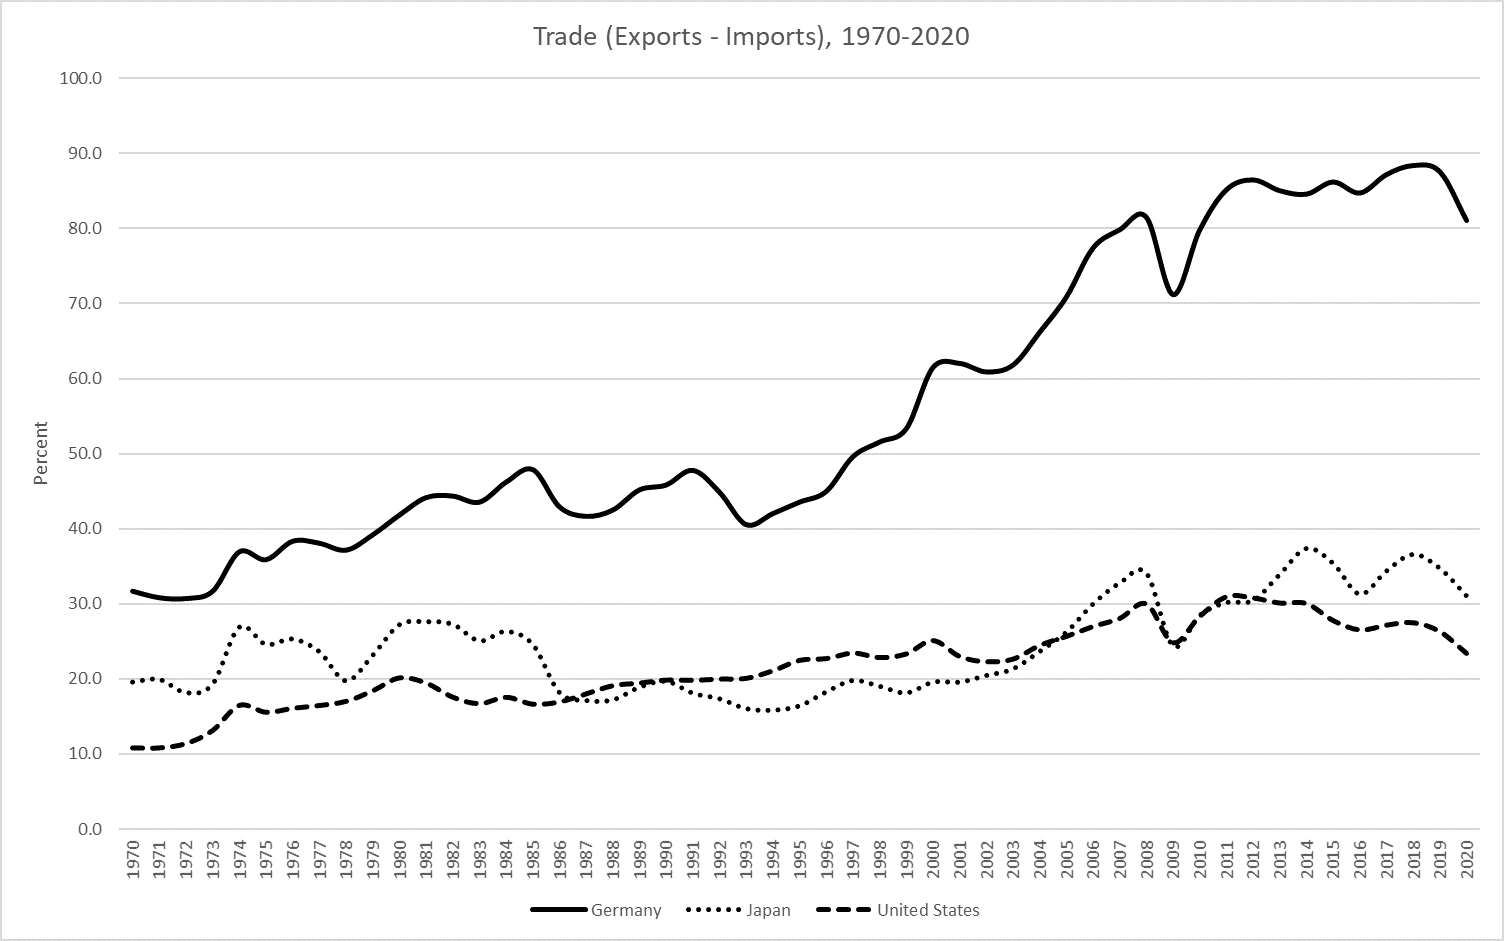 Net exports as a percentage of GDP for Germany, Japan, and the US, 1970-2020. Net exports have generally risen, with Germany's next exports being particularly high.